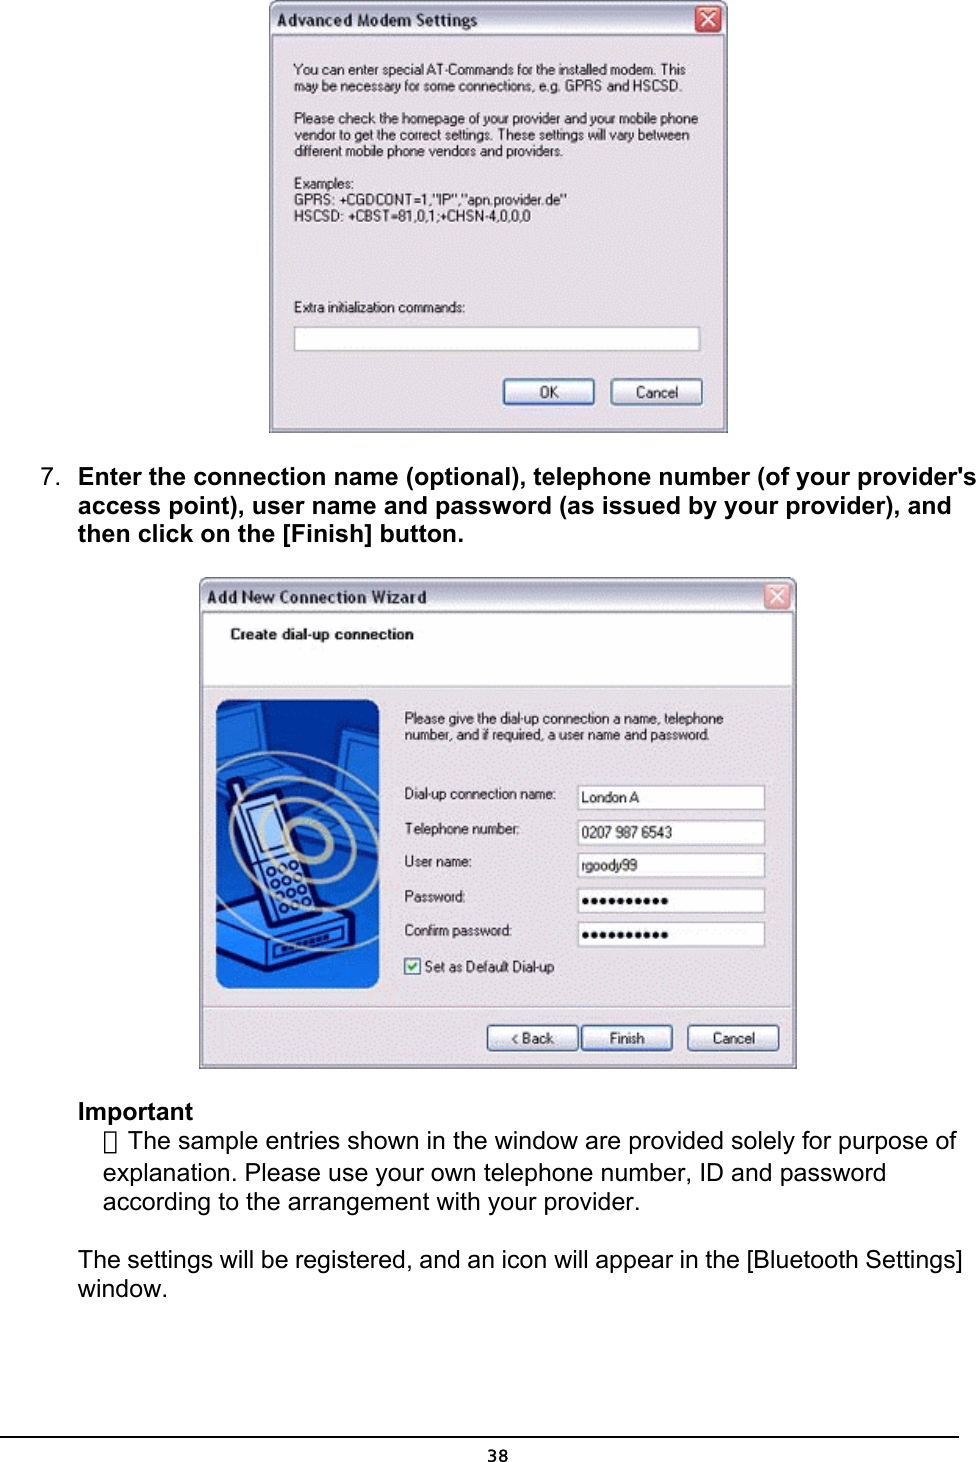   7.  Enter the connection name (optional), telephone number (of your provider&apos;s access point), user name and password (as issued by your provider), and then click on the [Finish] button.  Important ．The sample entries shown in the window are provided solely for purpose of explanation. Please use your own telephone number, ID and password according to the arrangement with your provider.   The settings will be registered, and an icon will appear in the [Bluetooth Settings] window.  38